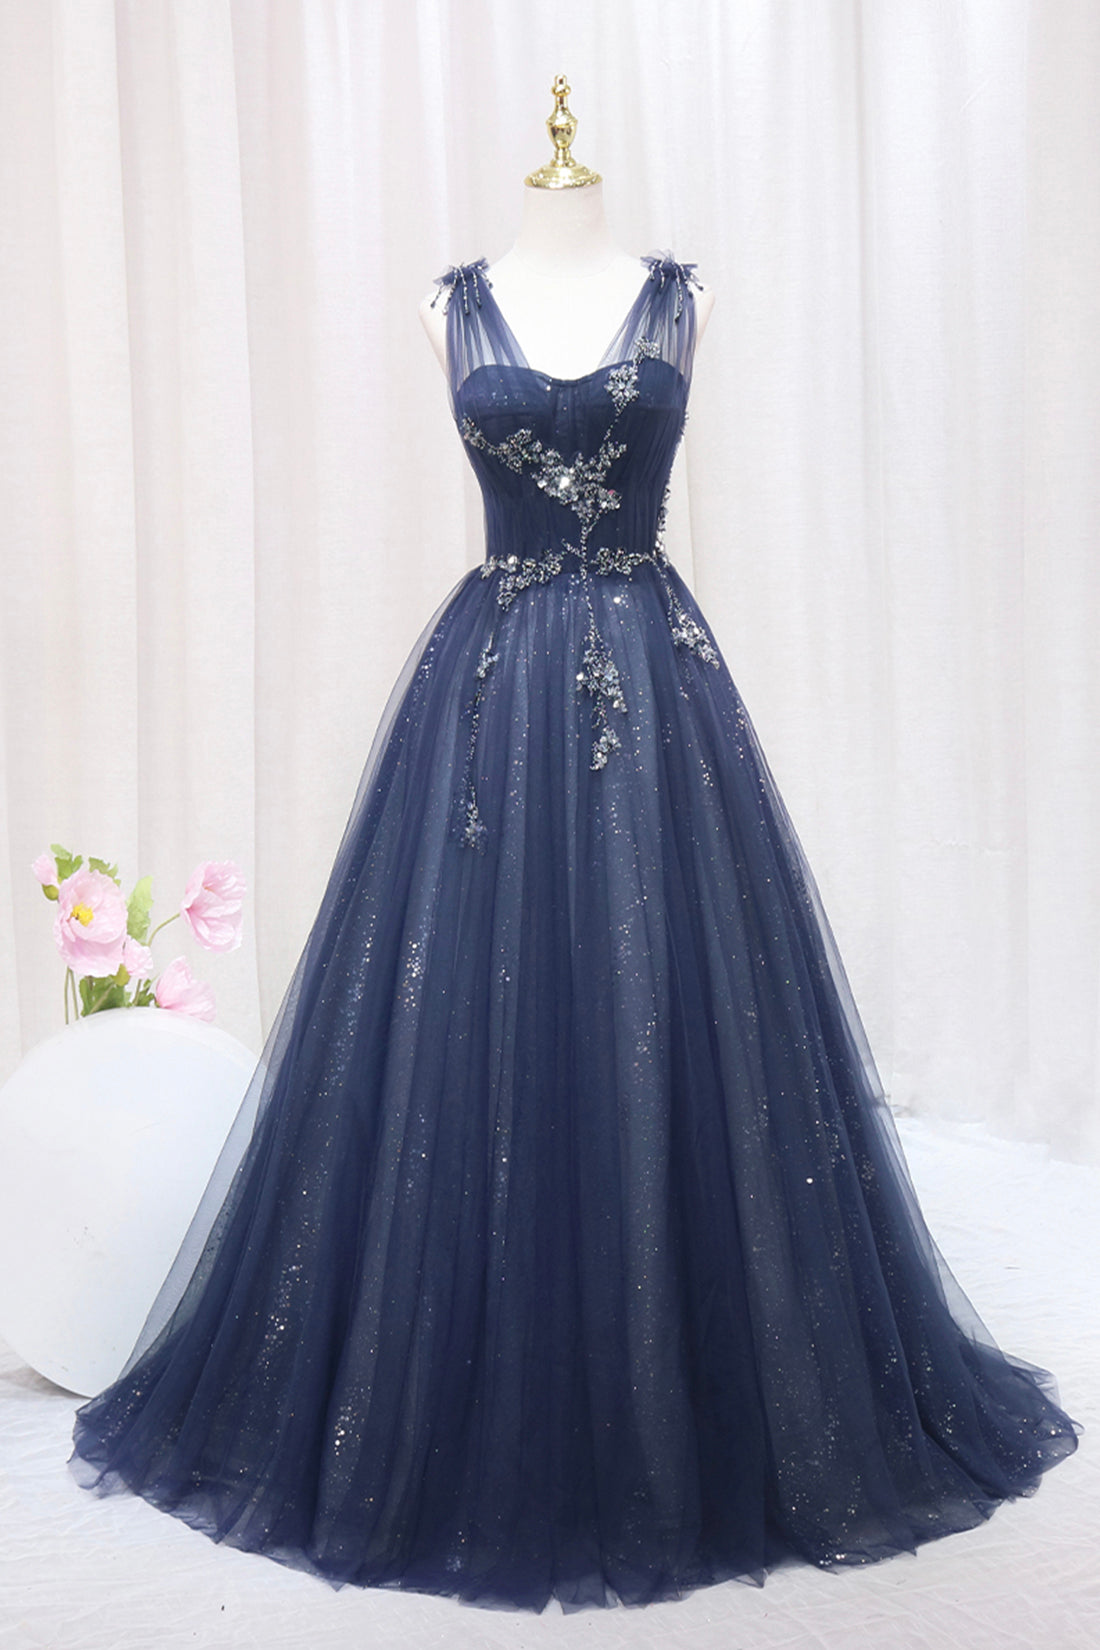 Bridesmaid Dresses Blues, Blue Tulle Beaded Long Prom Dress, Blue A-Line Evening Party Dress